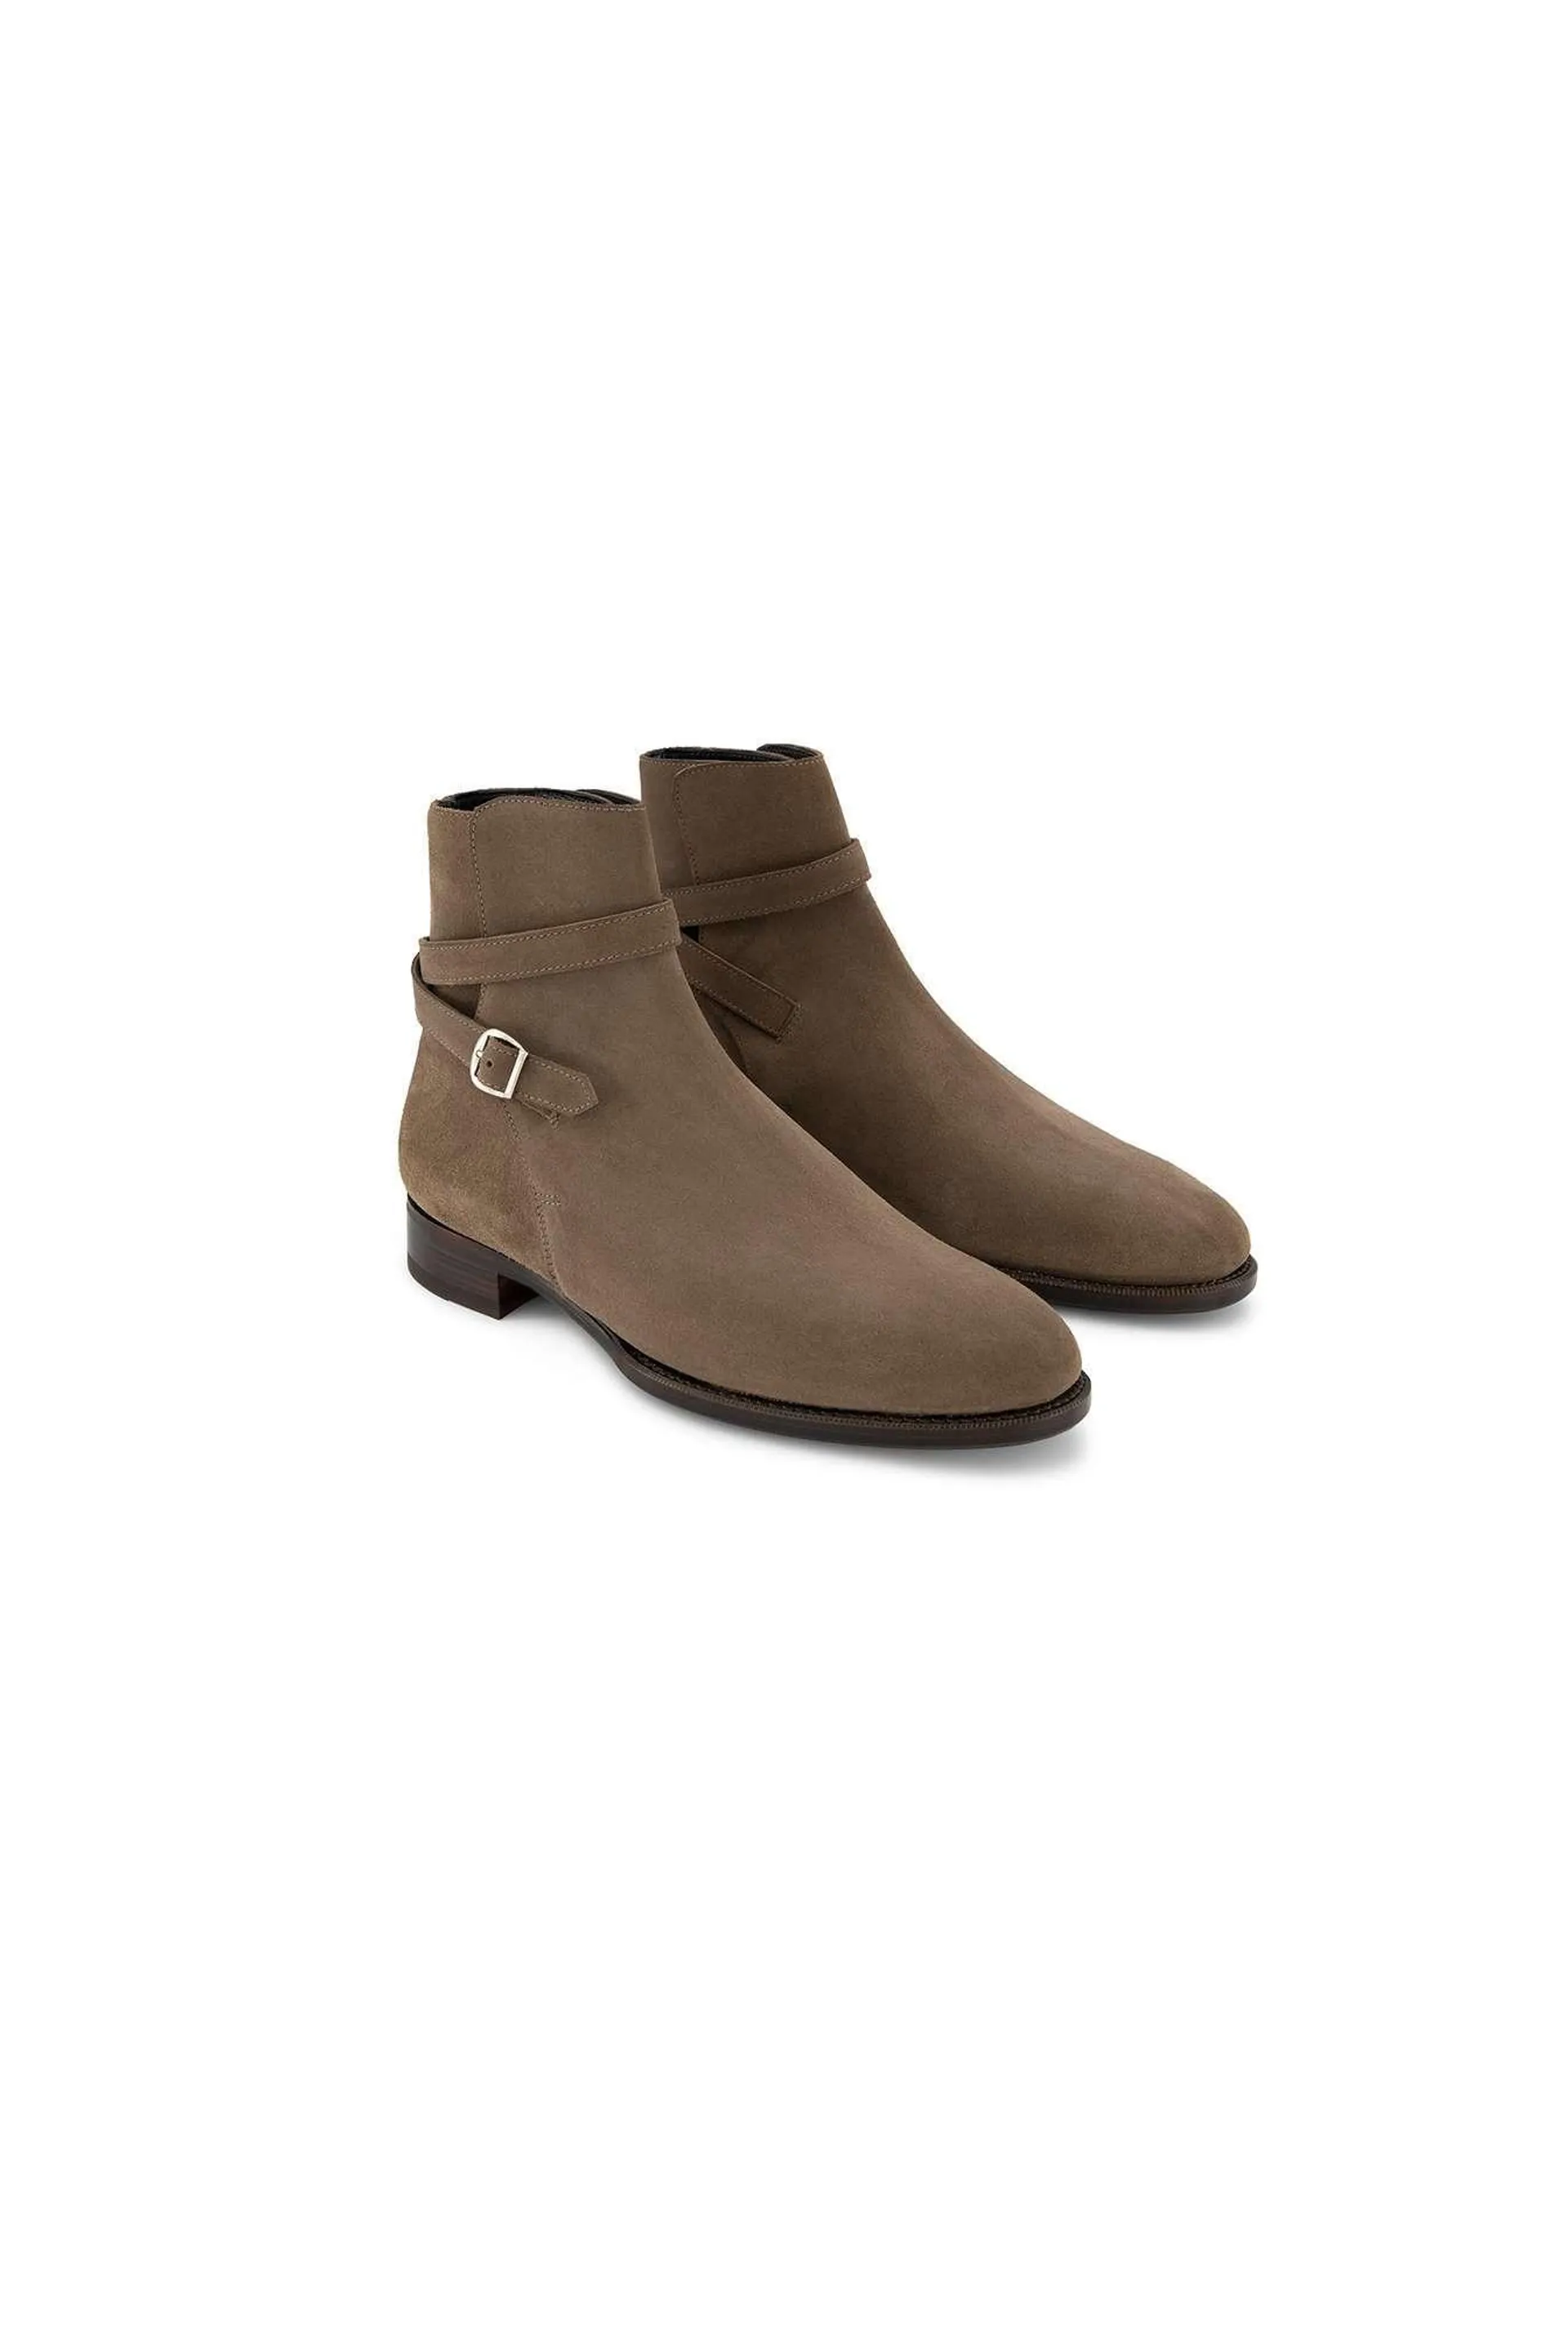 Indra Suede Tall Boot